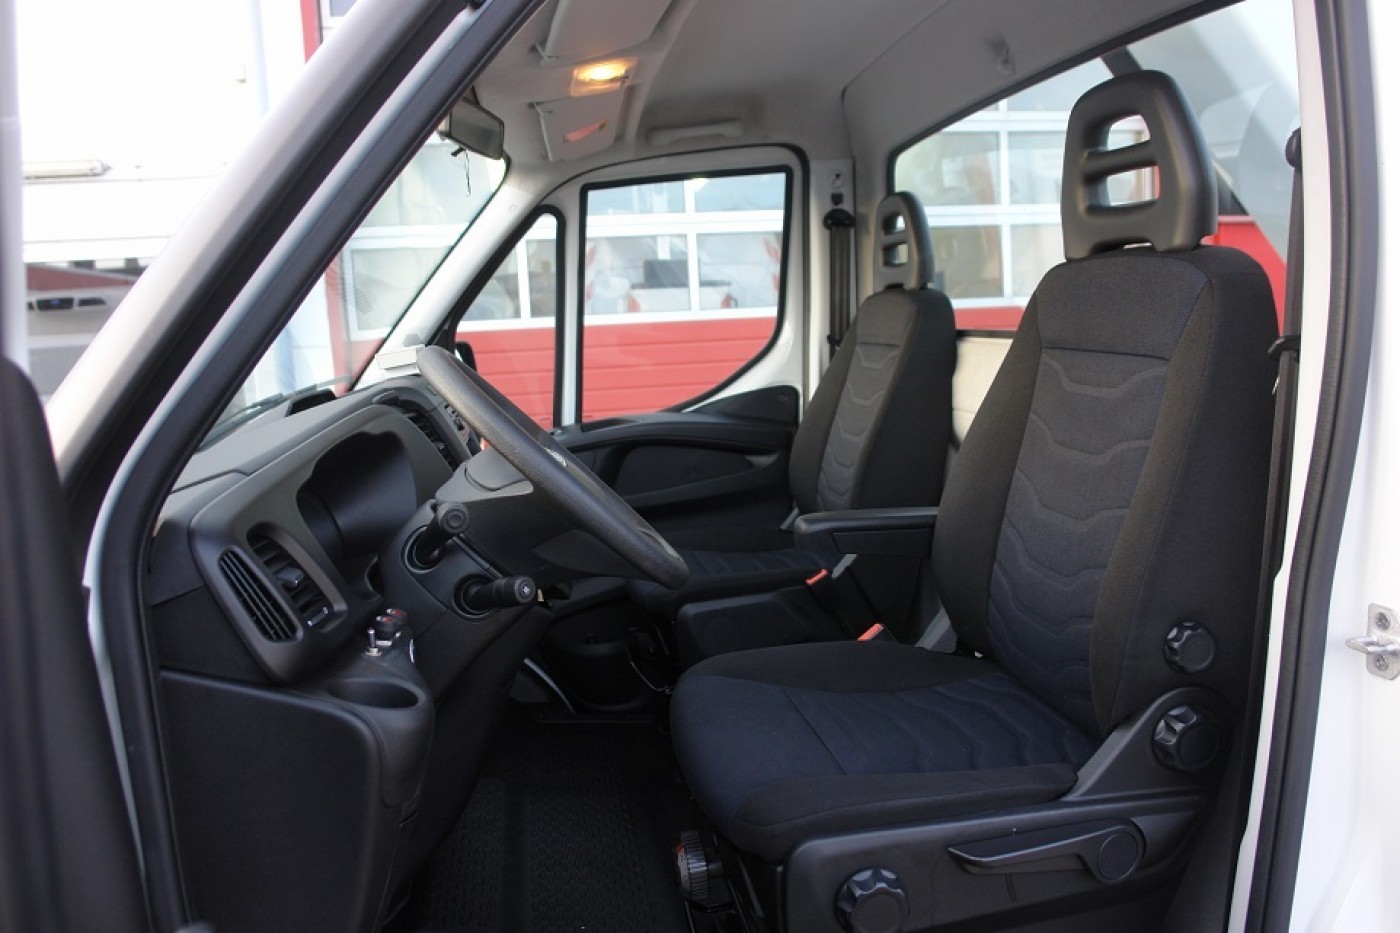 Iveco Daily 35S13 nacela prb Time France LT130TB 13m Carlig de tractare